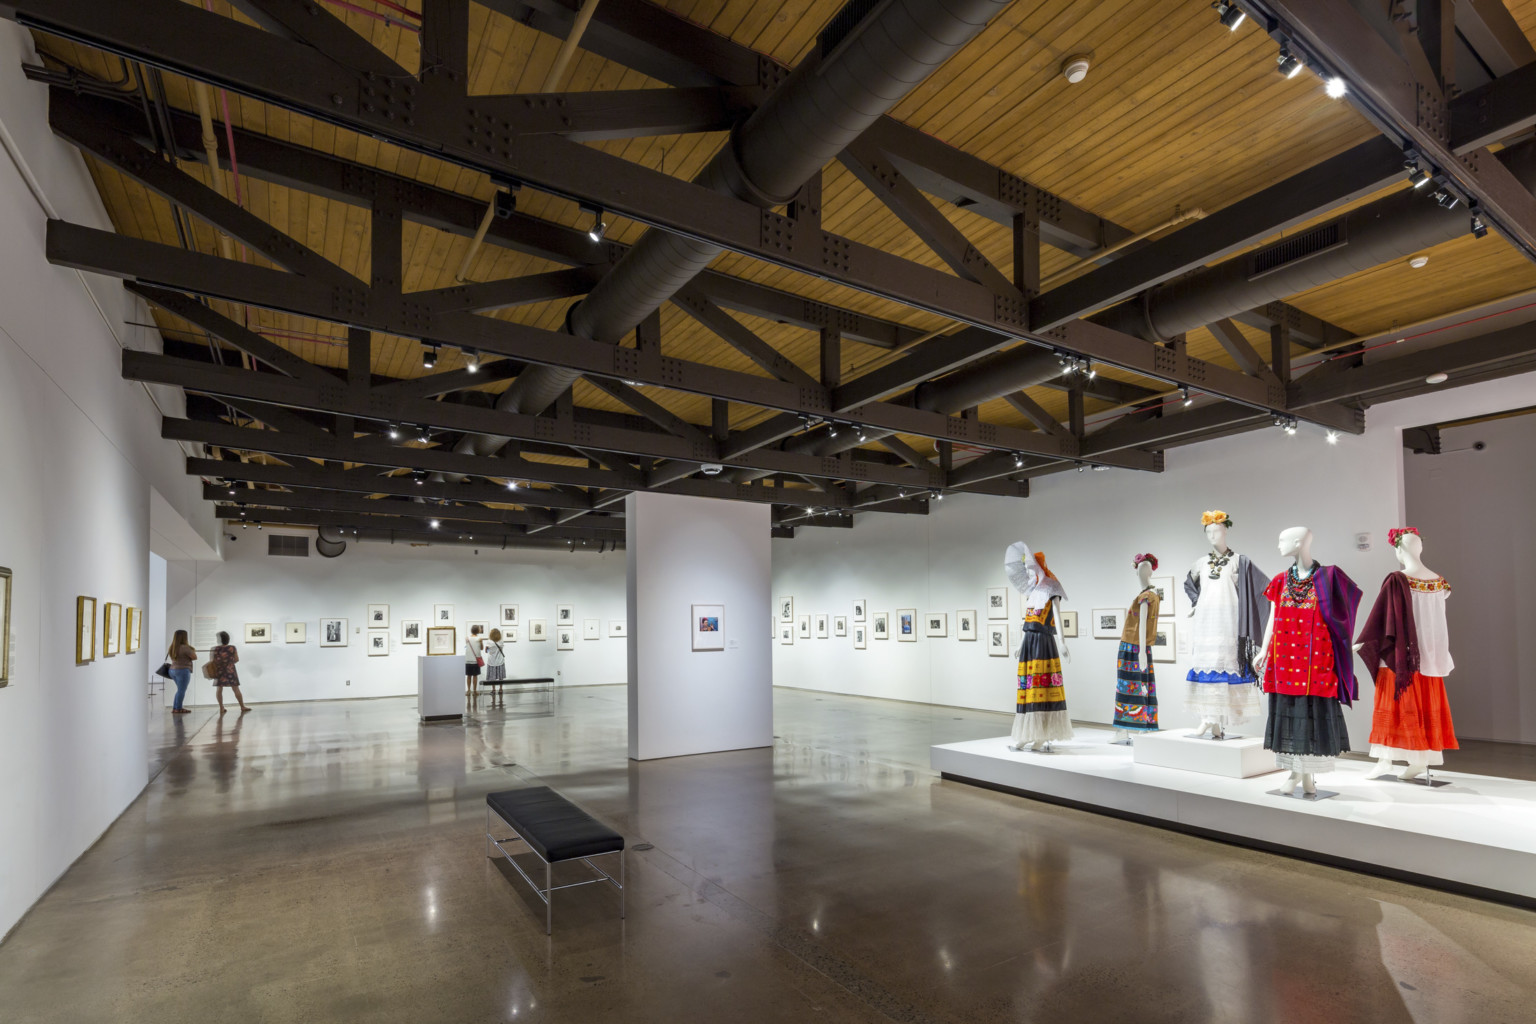 A gallery with paintings and a display of dressed mannequins, under a wood ceiling with exposed black support beams and pipes